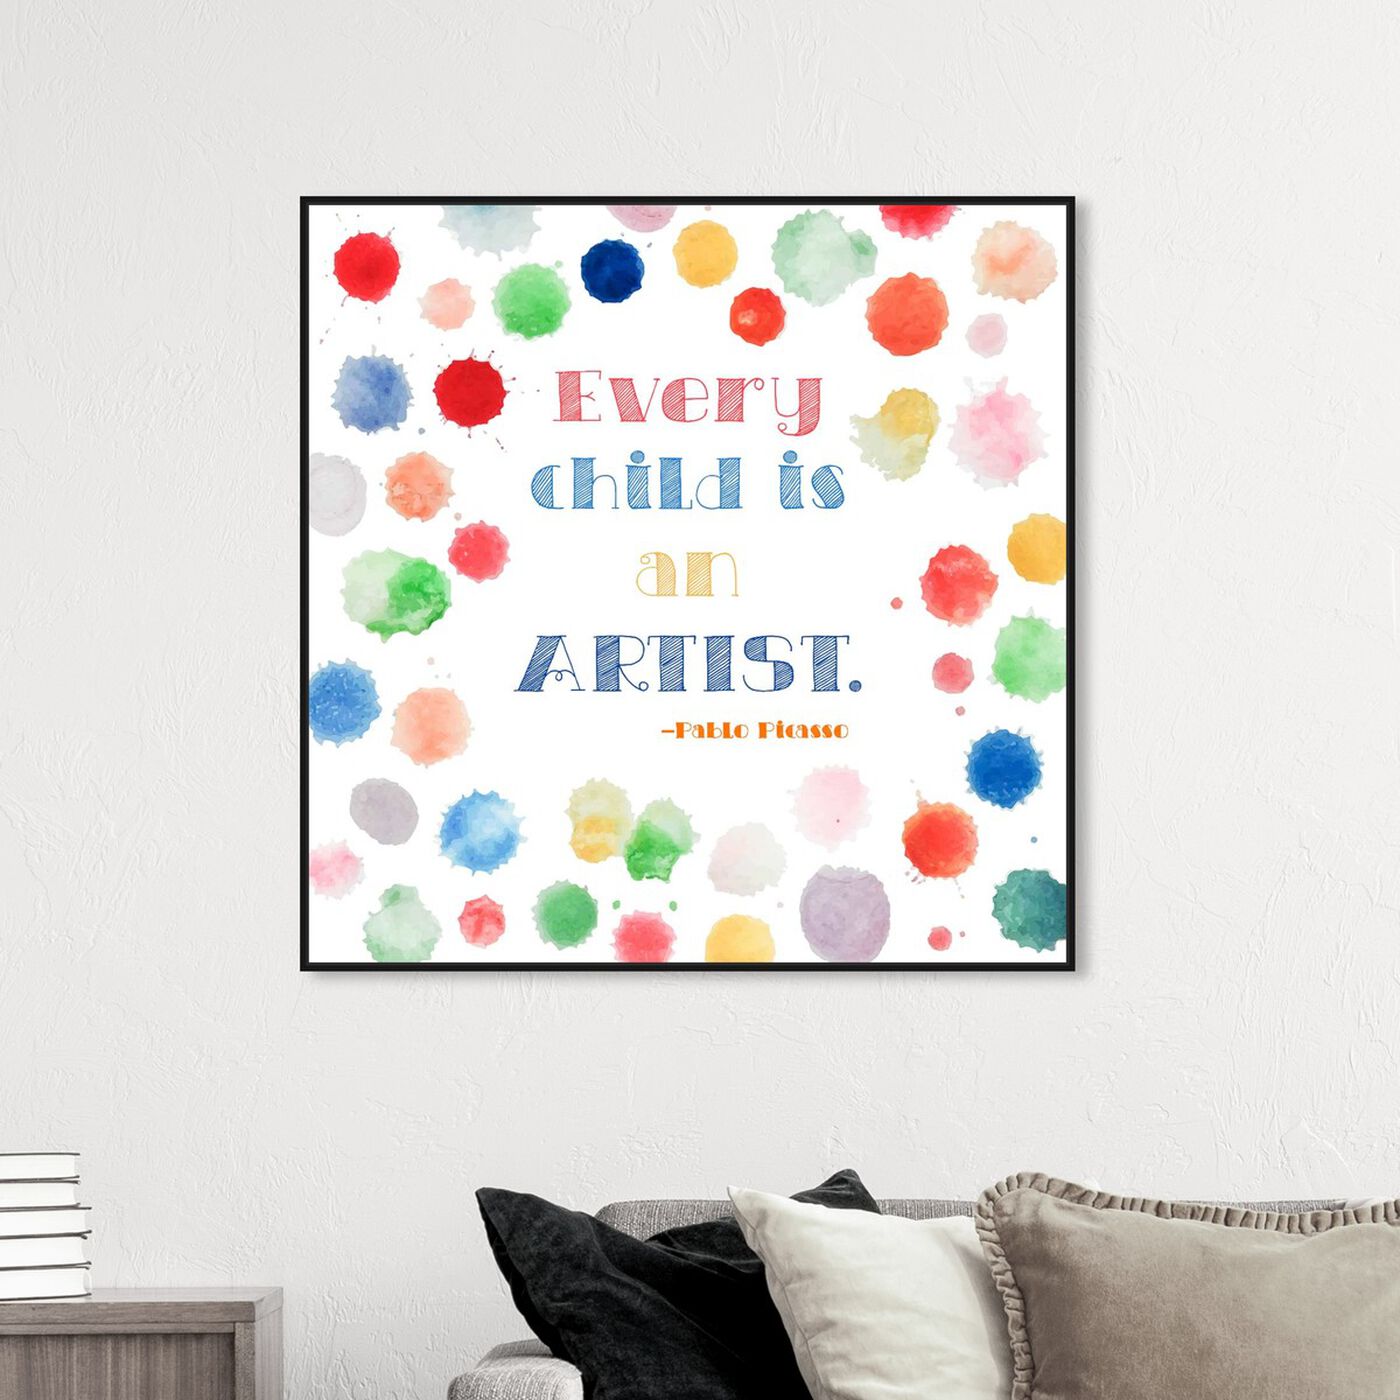 Hanging view of Every Child is an Artist featuring typography and quotes and family quotes and sayings art.